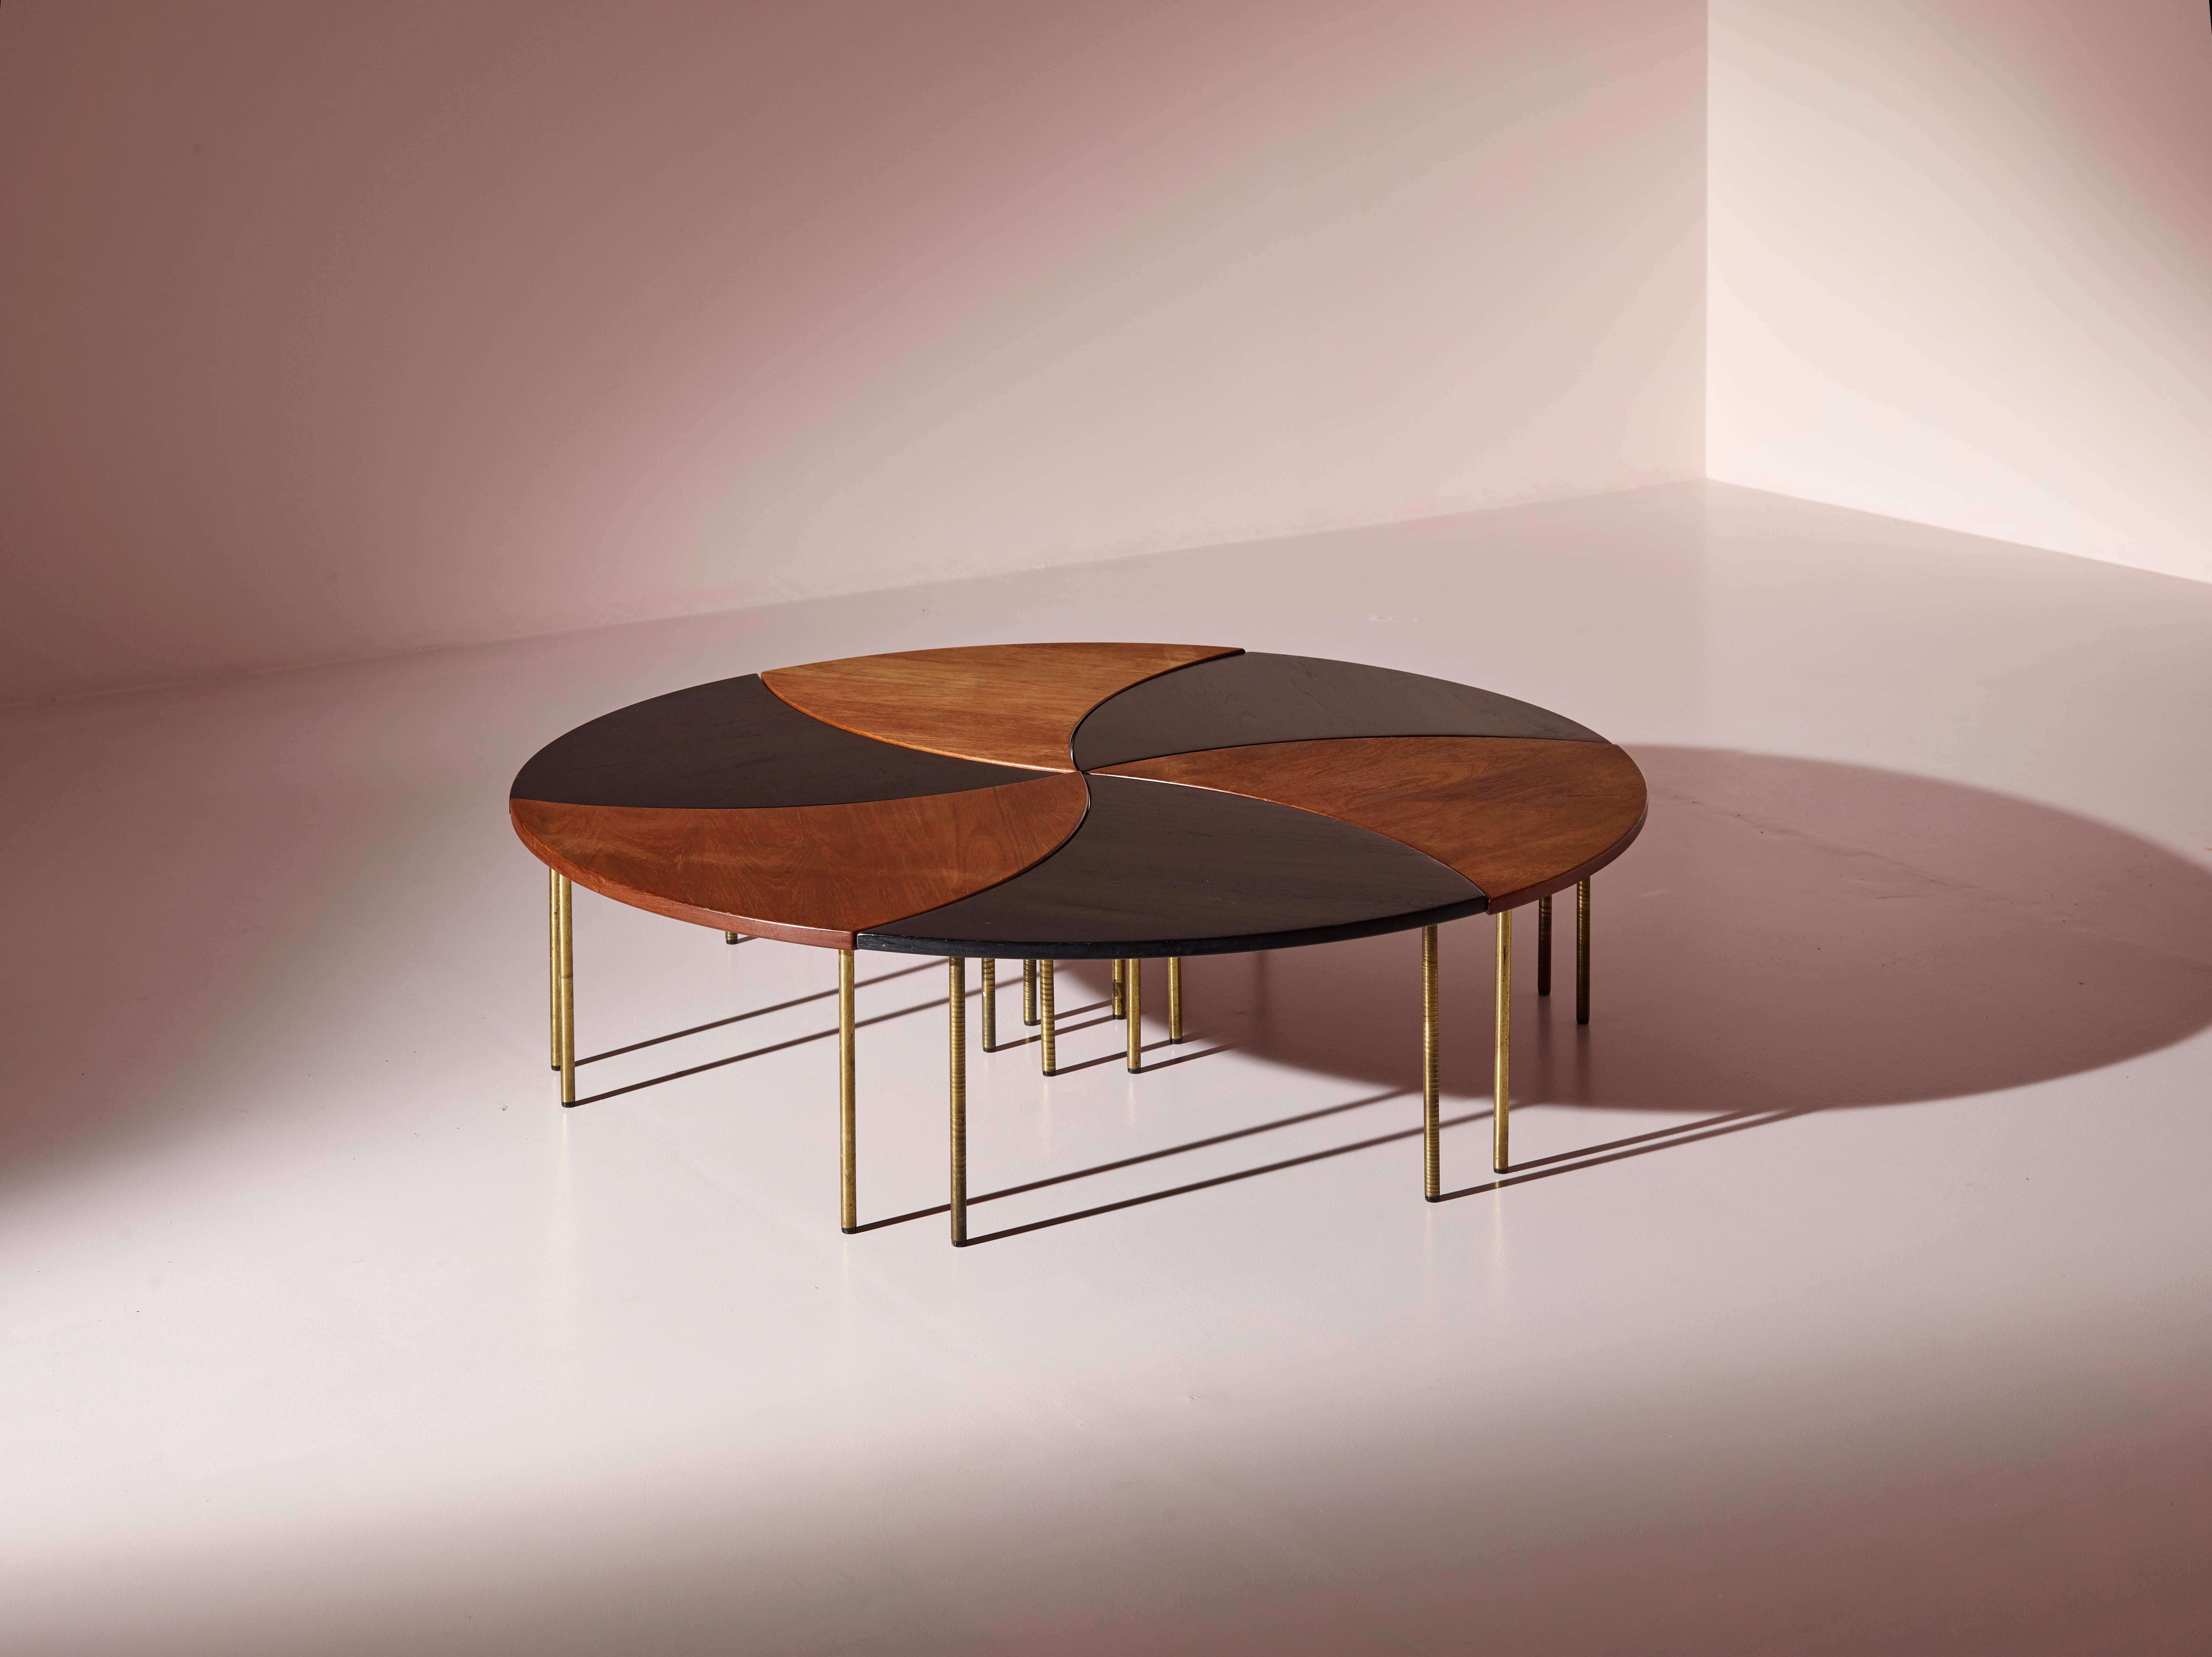 This beautiful an rare two-tone modular coffee table was designed by the renowned Danish designer Peter Hvidt in 1952 and produced by the cabinetmaker France & Son in the early 1950s.

The piece is a stunning example of mid-century modern design: